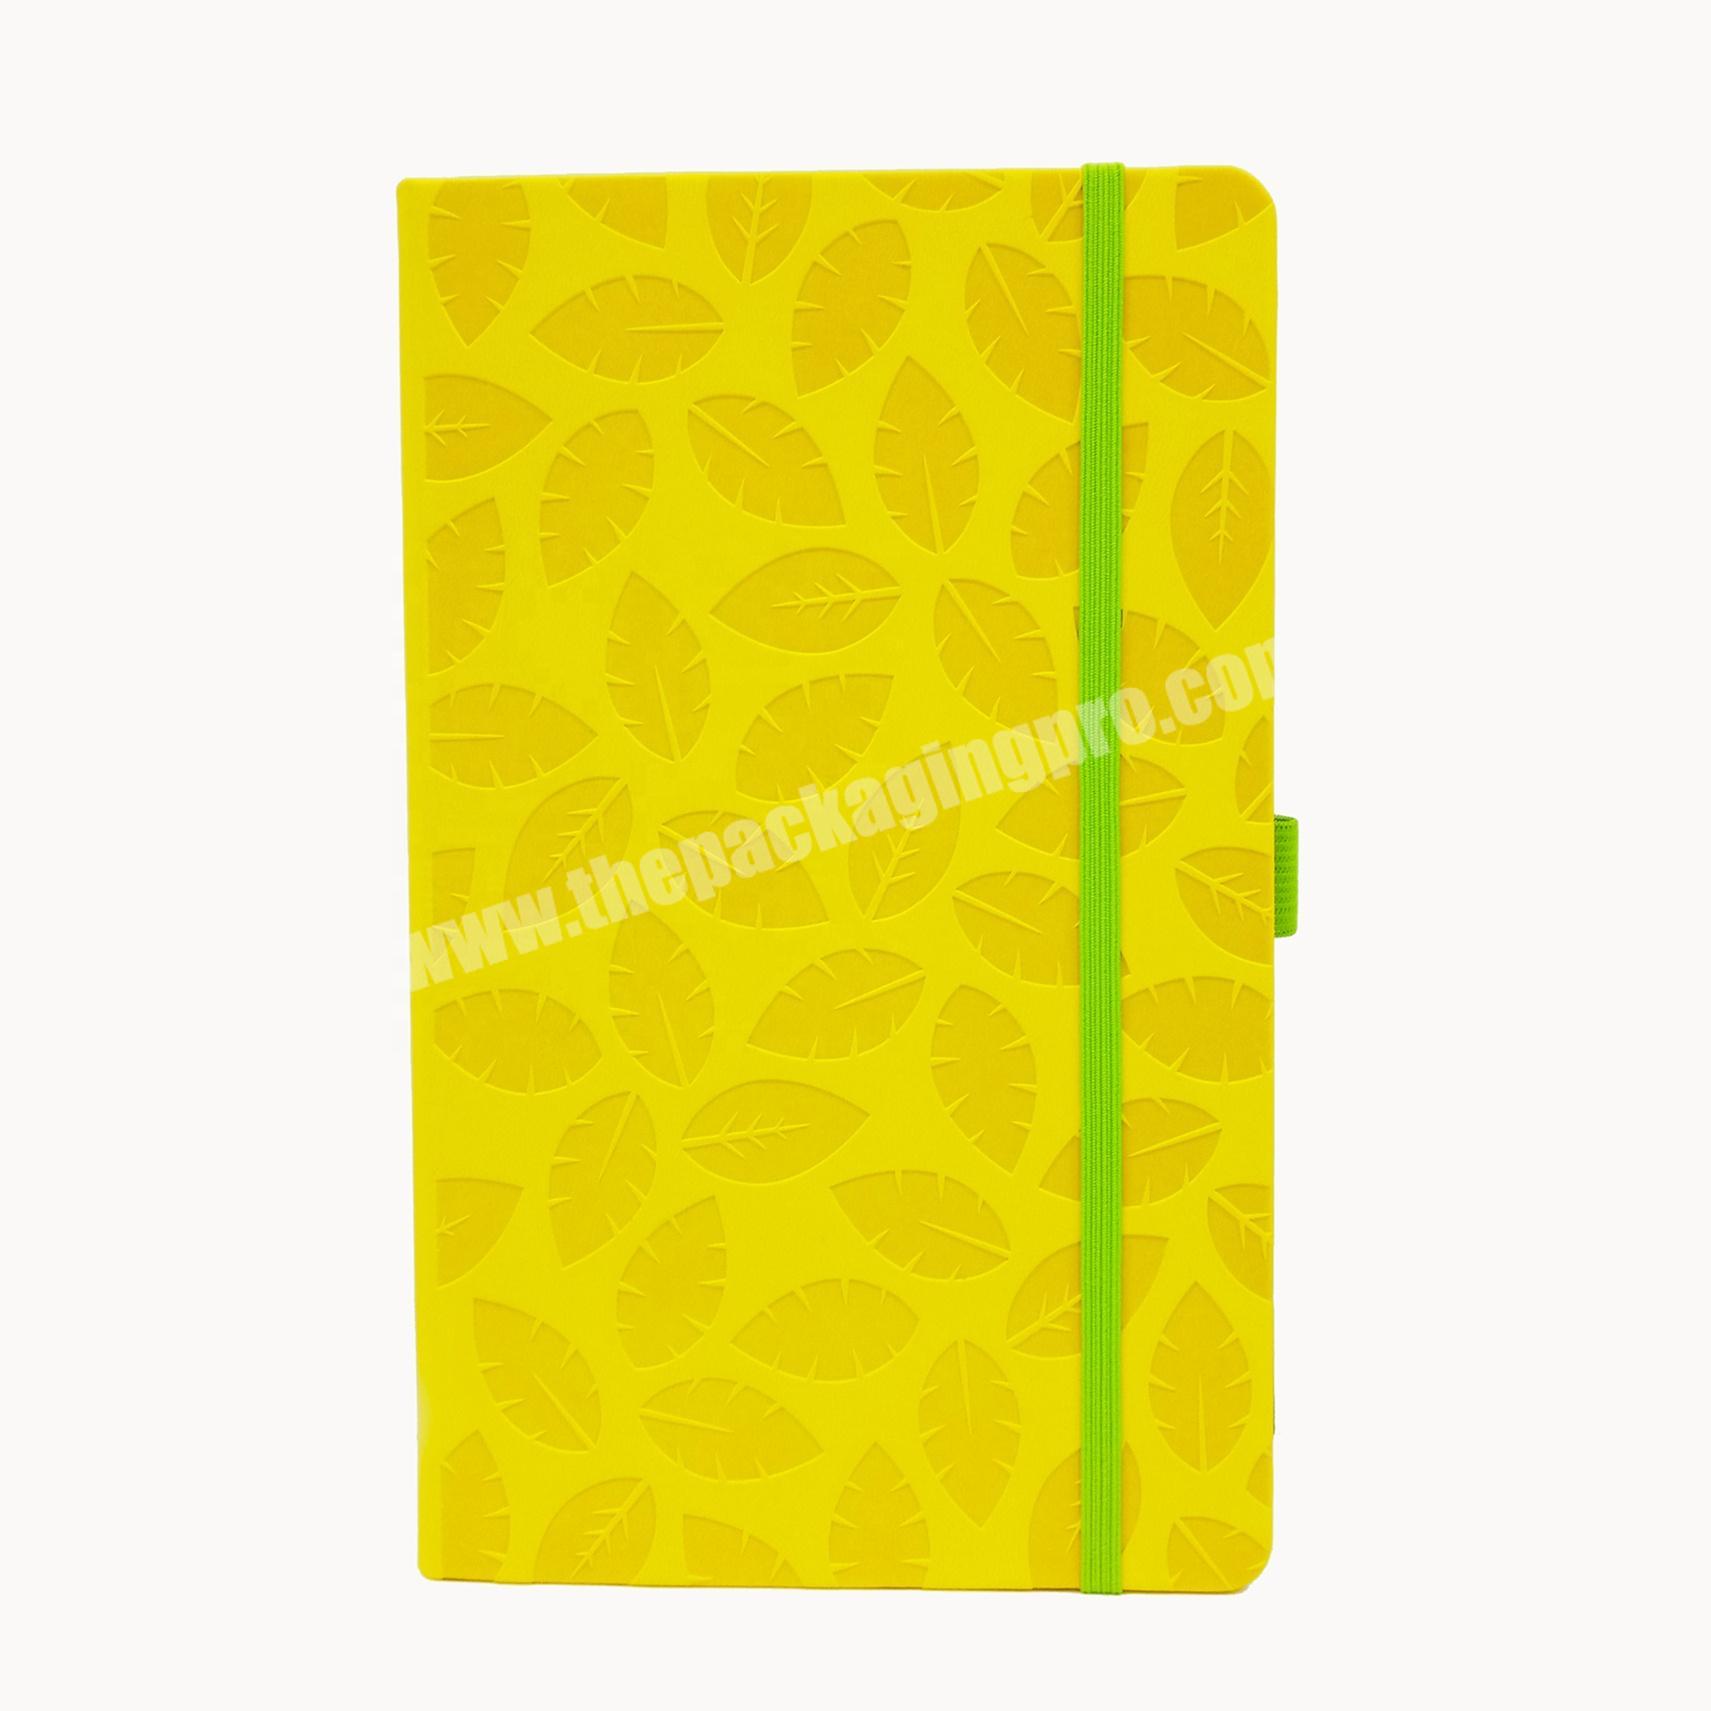 Wholesale business notebook academic planner with pocket private journal